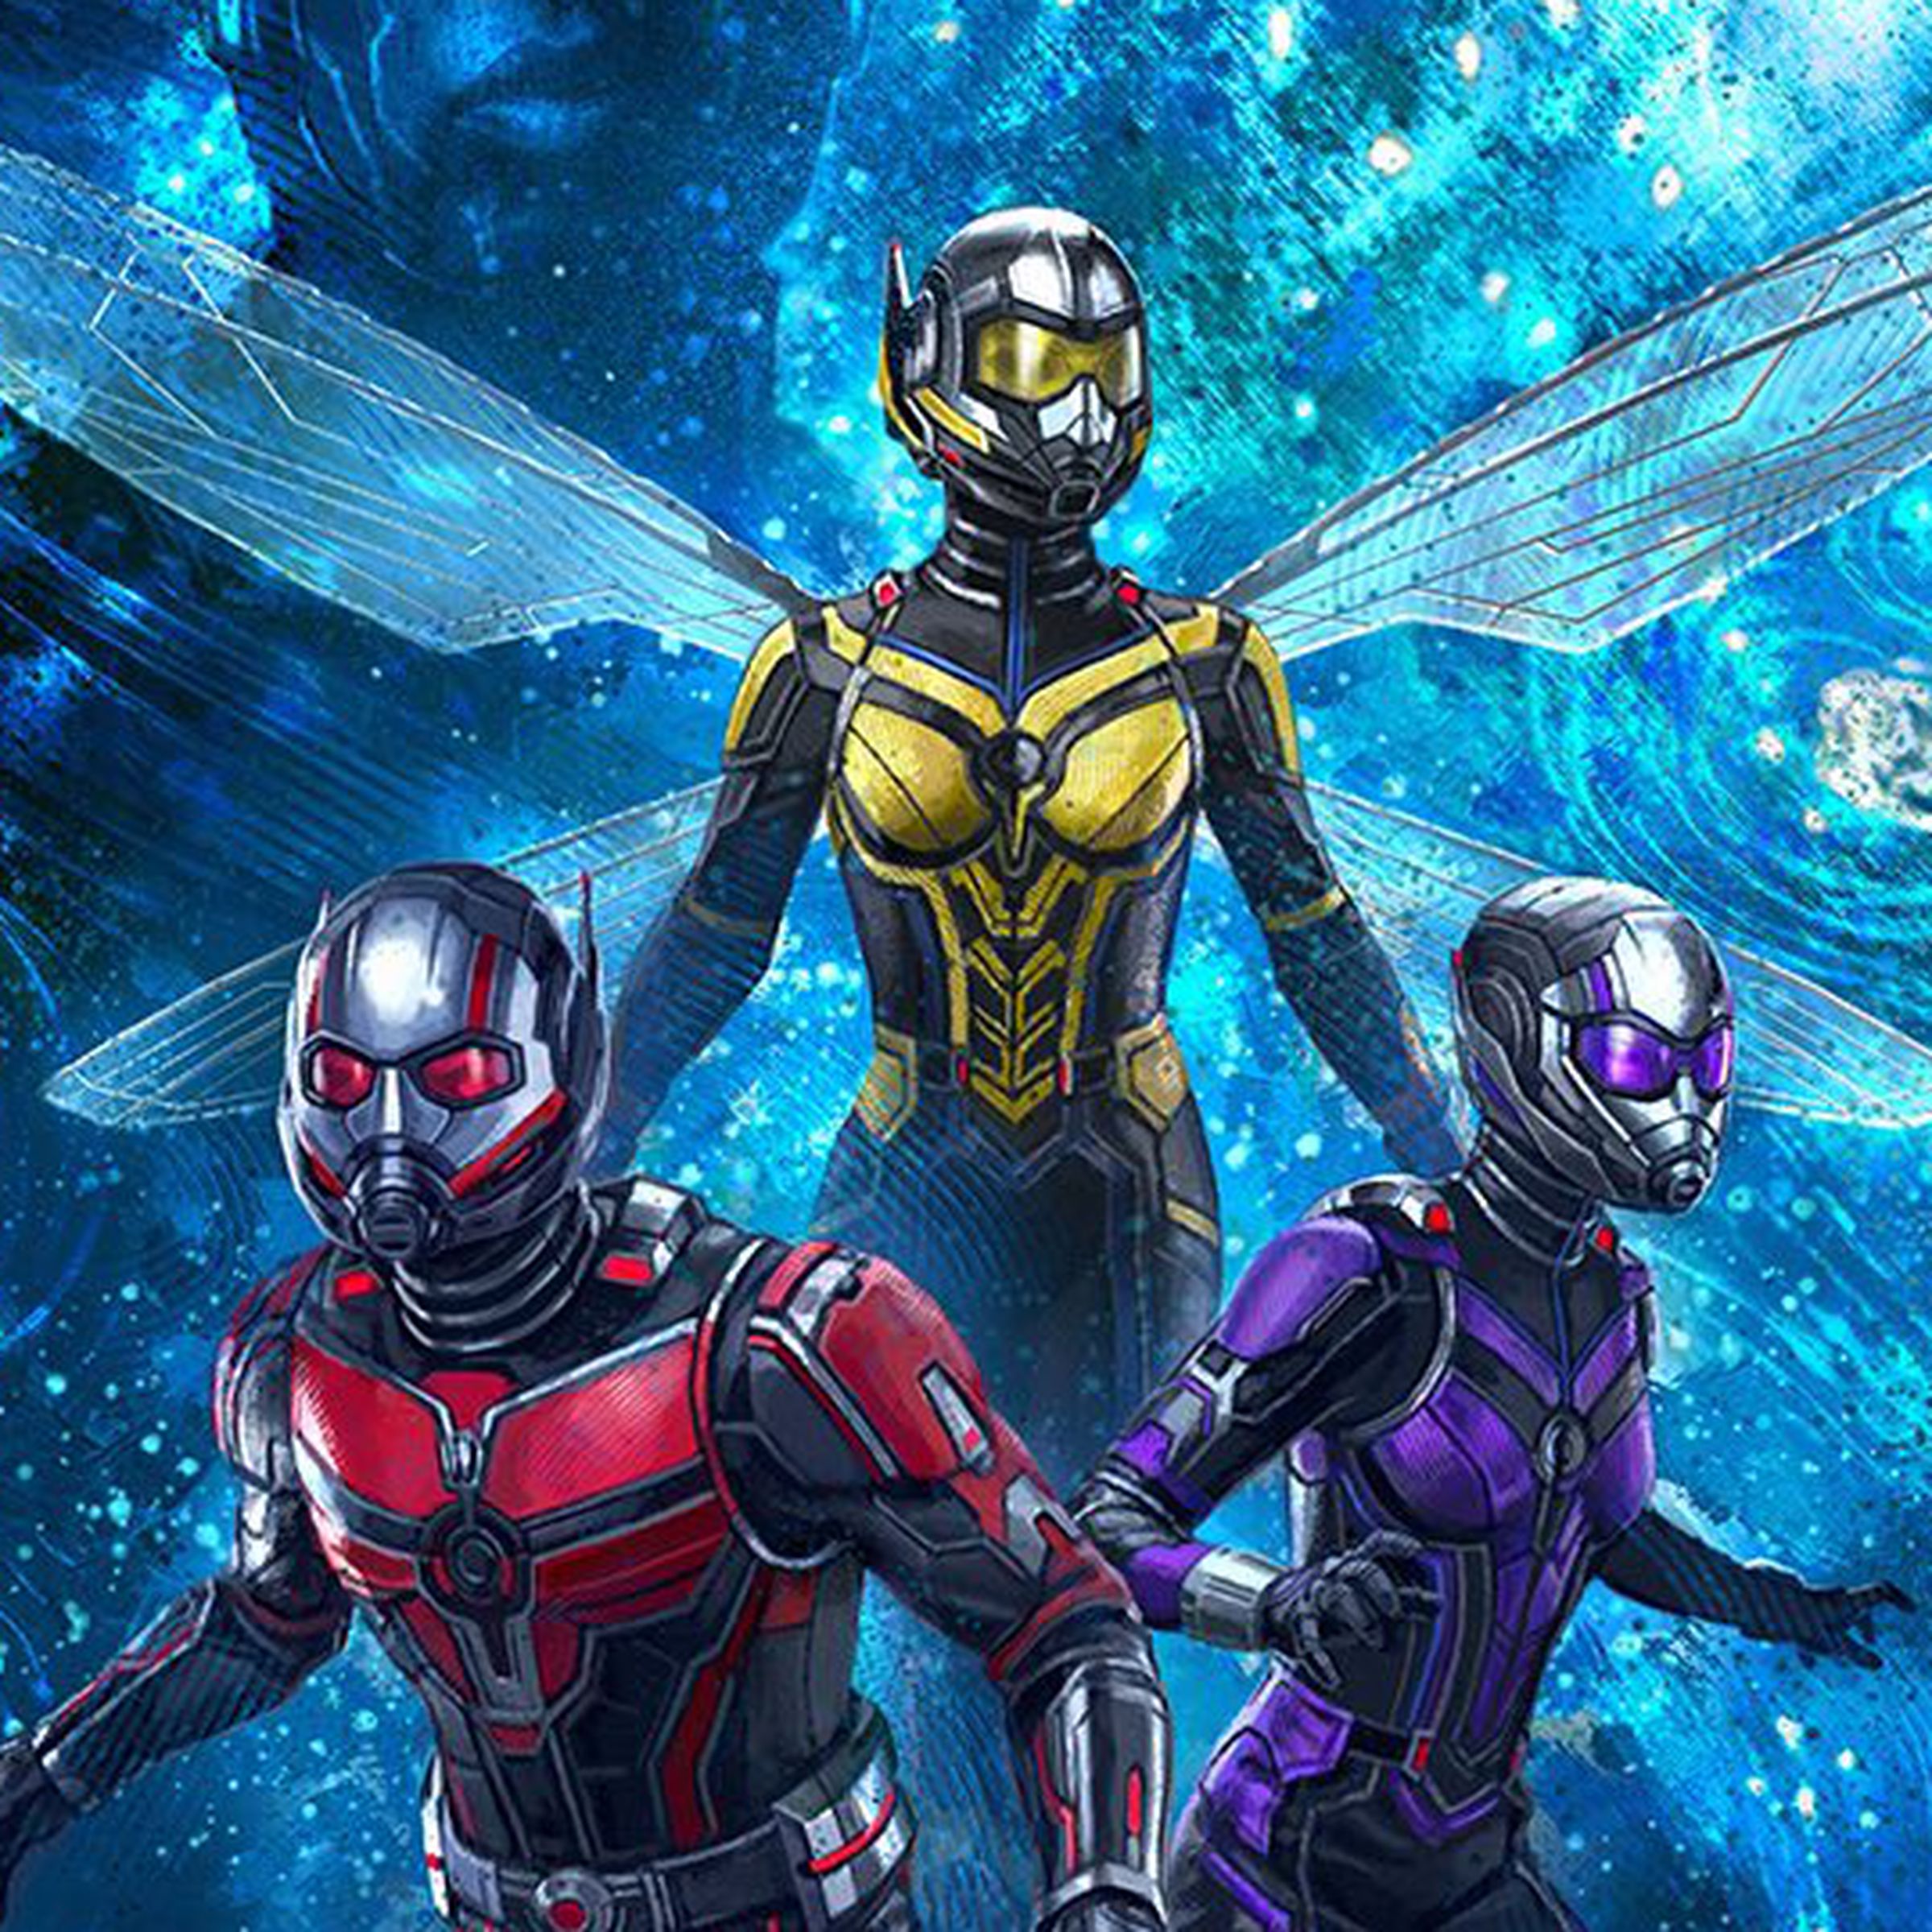 Concept art for Ant-Man & The Wasp: Quantumania.